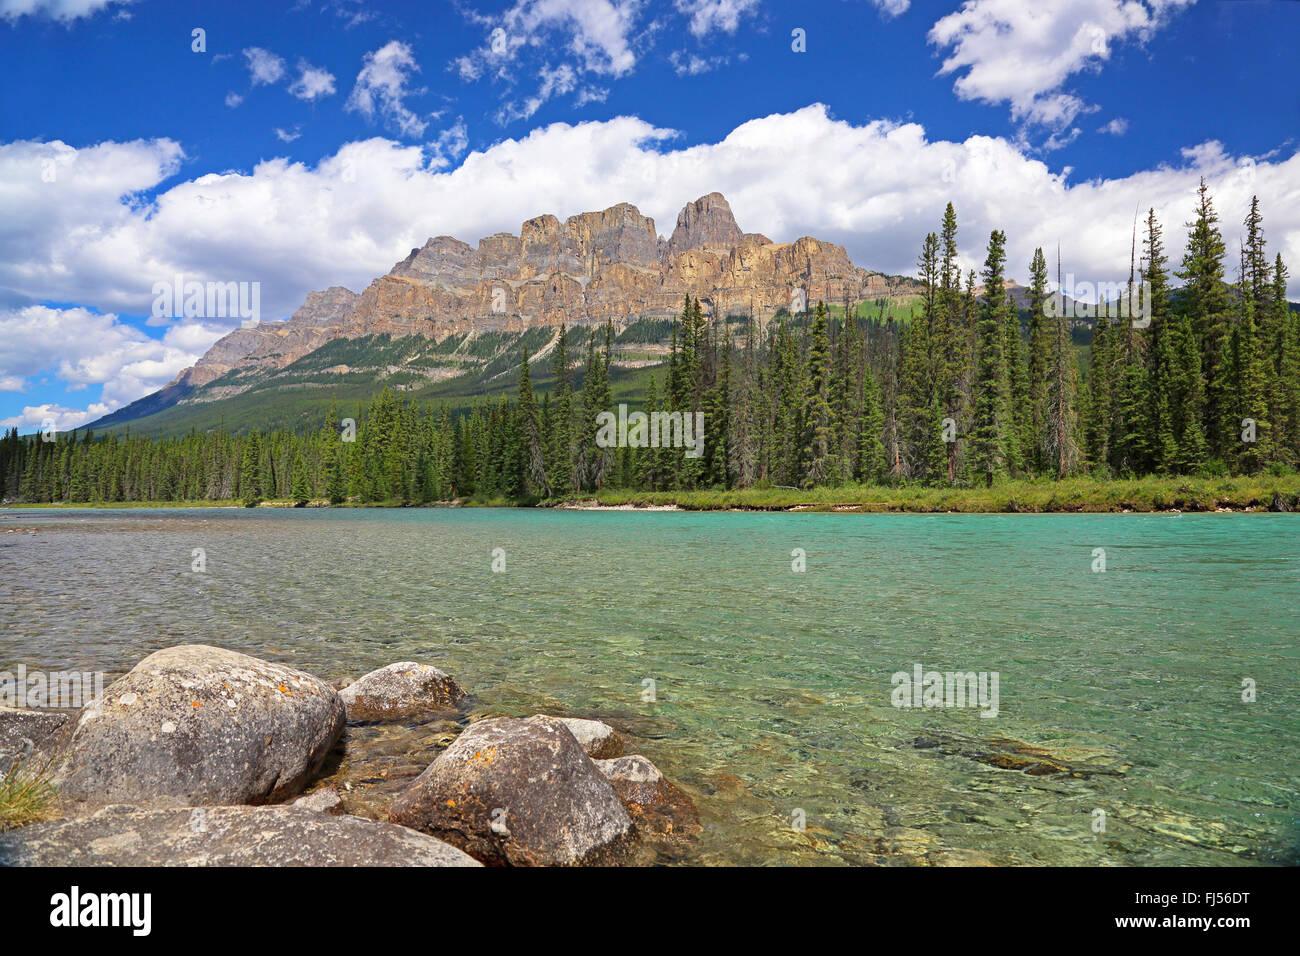 Castle Mountain in Bow River Valley, Rocky Mountains, Canada, Alberta, Banff National Park Stock Photo